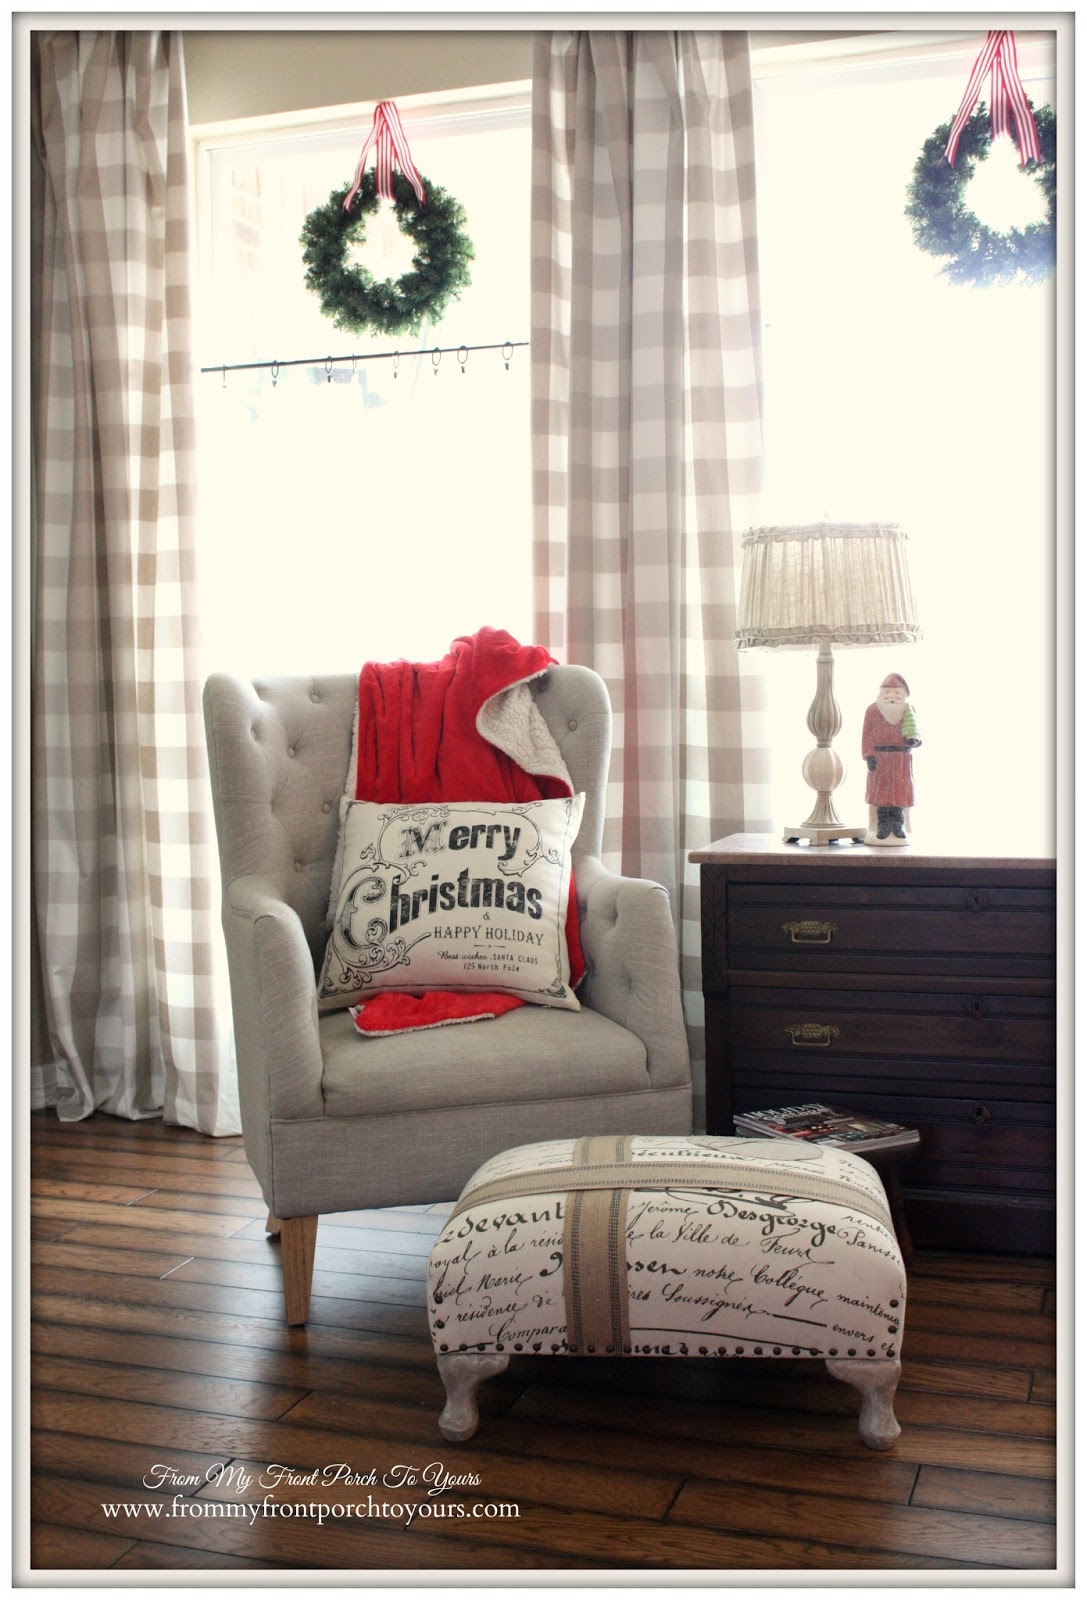 Buffalo Check Curtains-Farmhouse Vintage Christmas Living Room- From My Front Porch To Yours